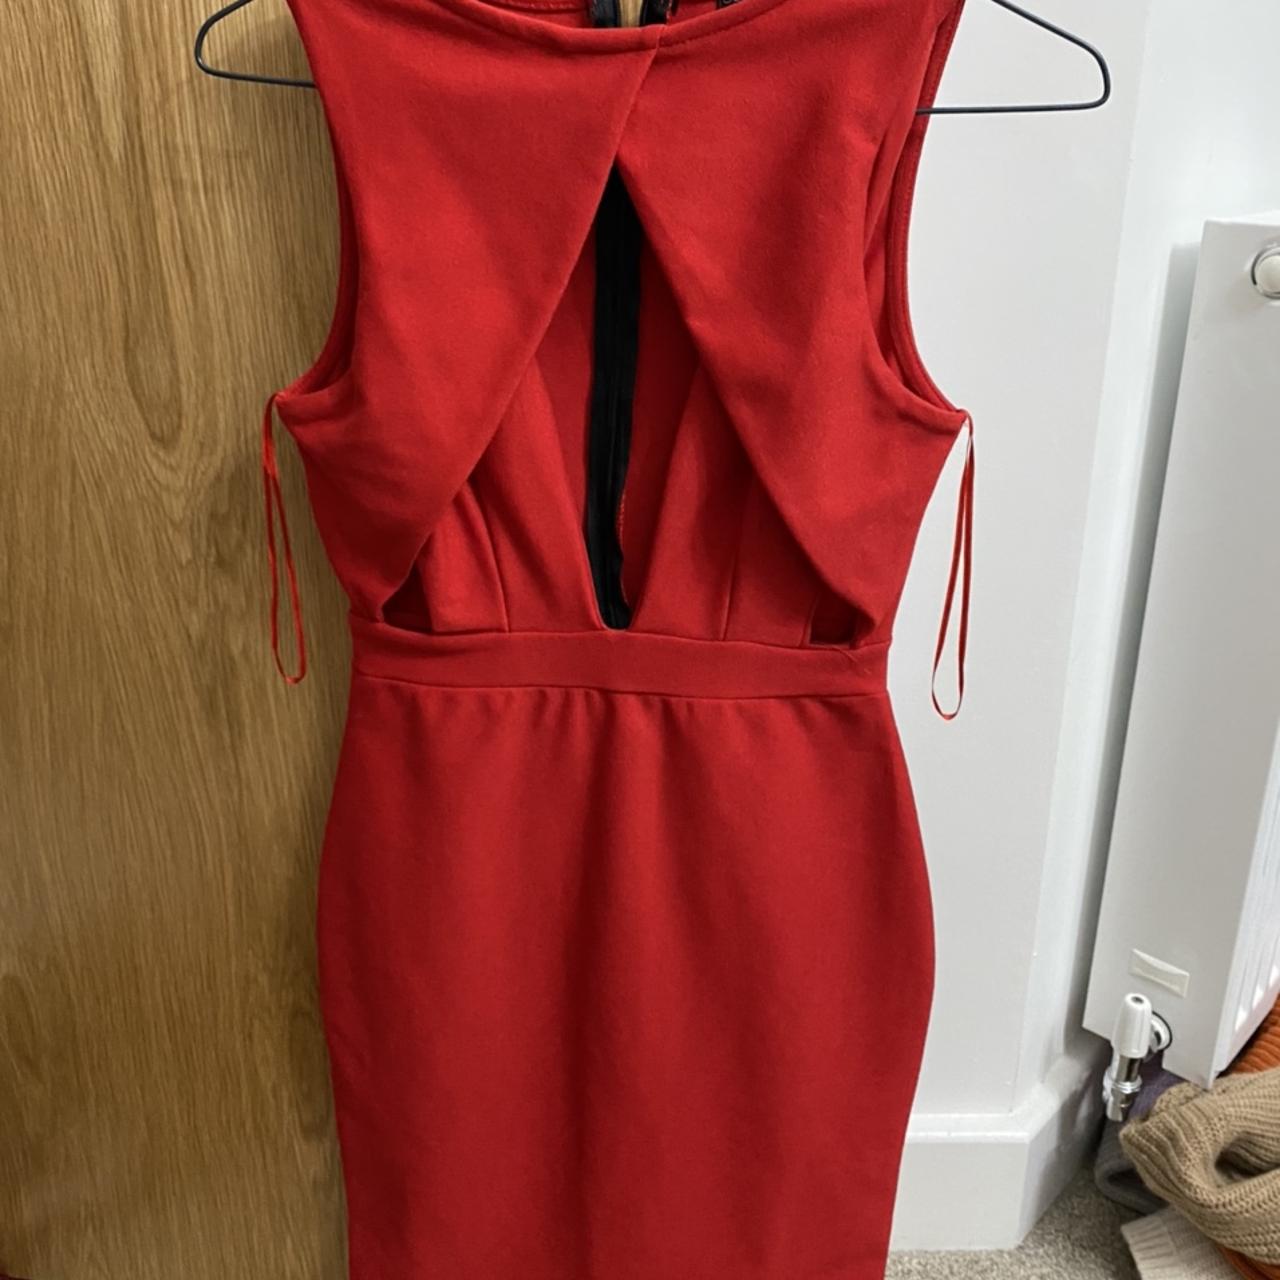 Boohoo red cut out dress. Going out dress. Size... - Depop